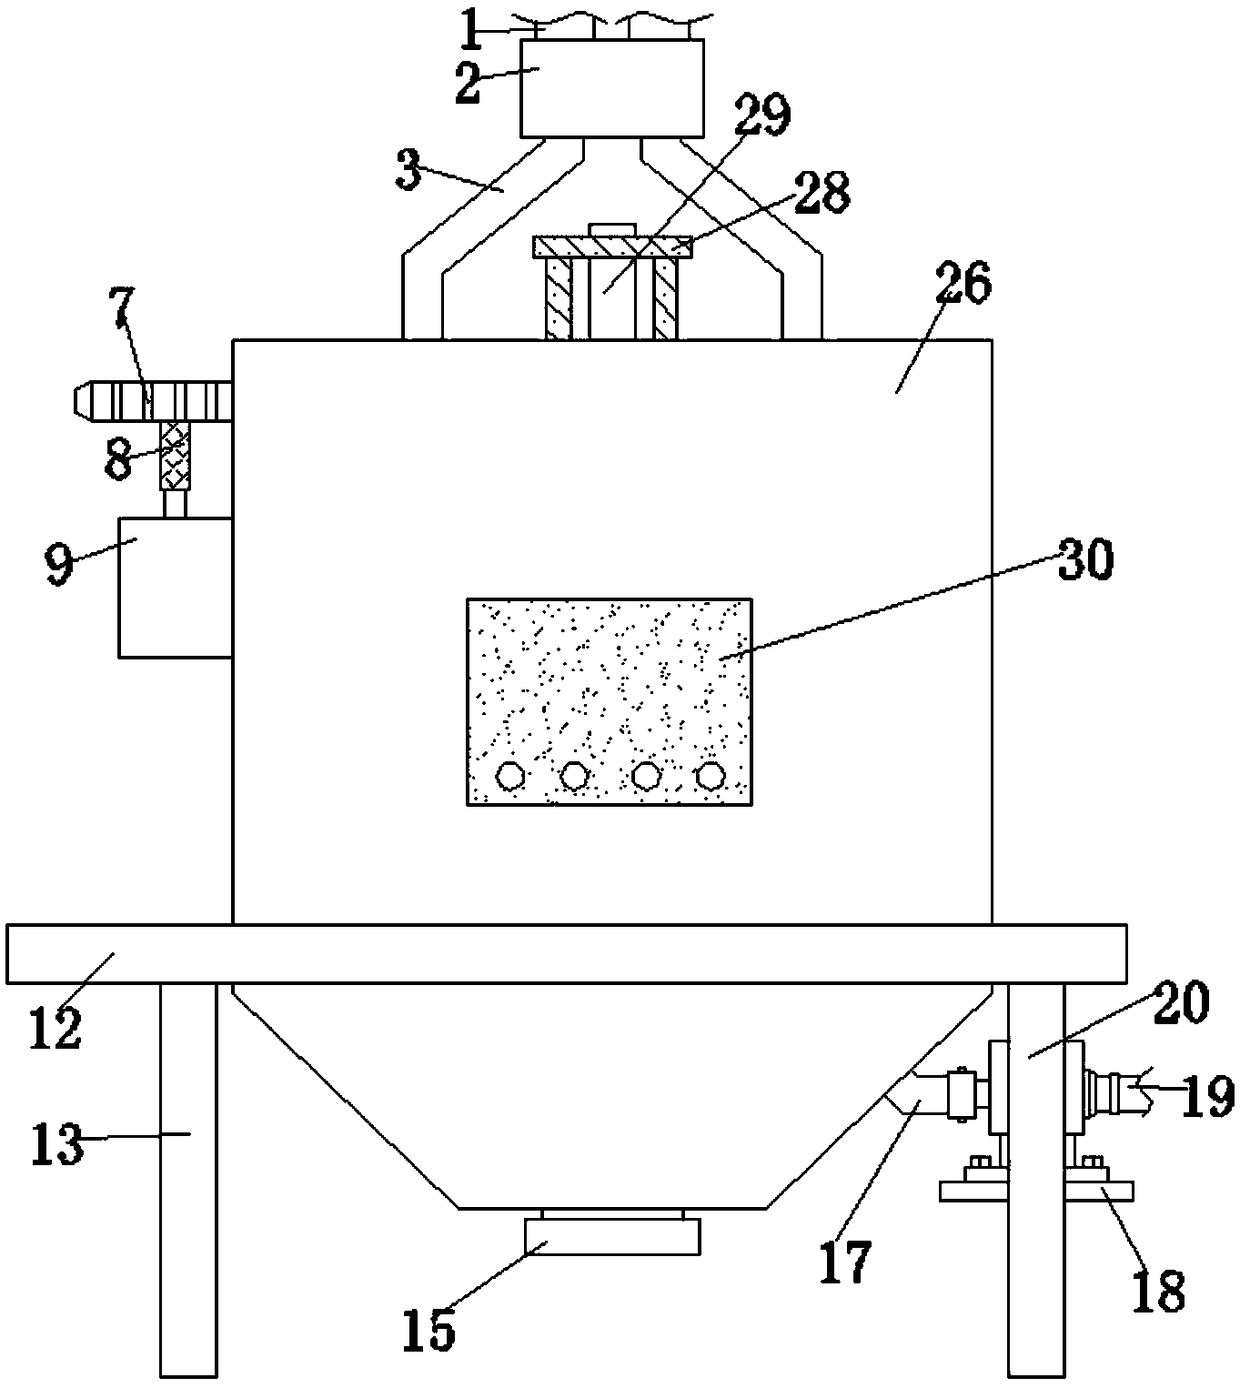 Uniformly-mixing stirring device for medical technology development